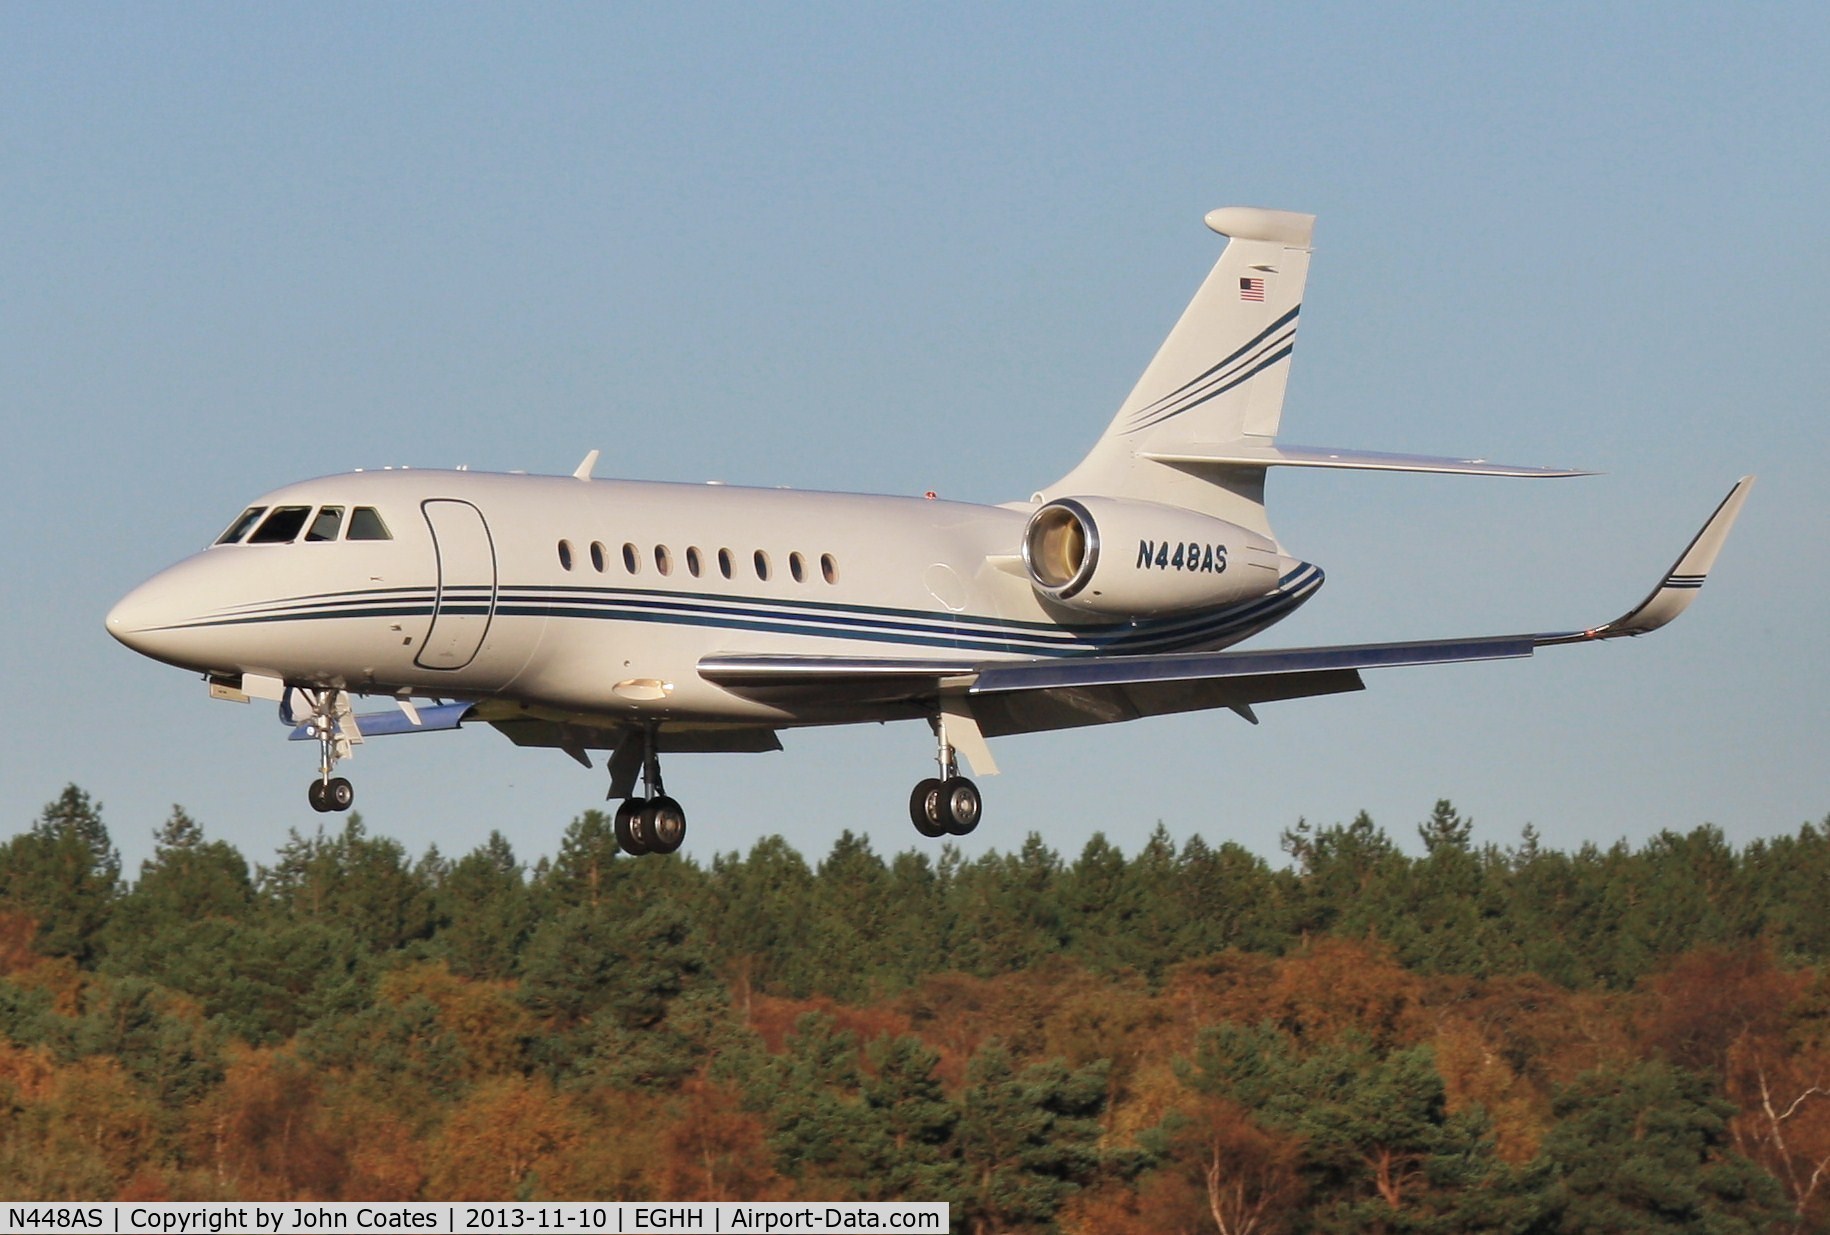 N448AS, 2011 Dassault Falcon 2000EX C/N 233, Finals to 26